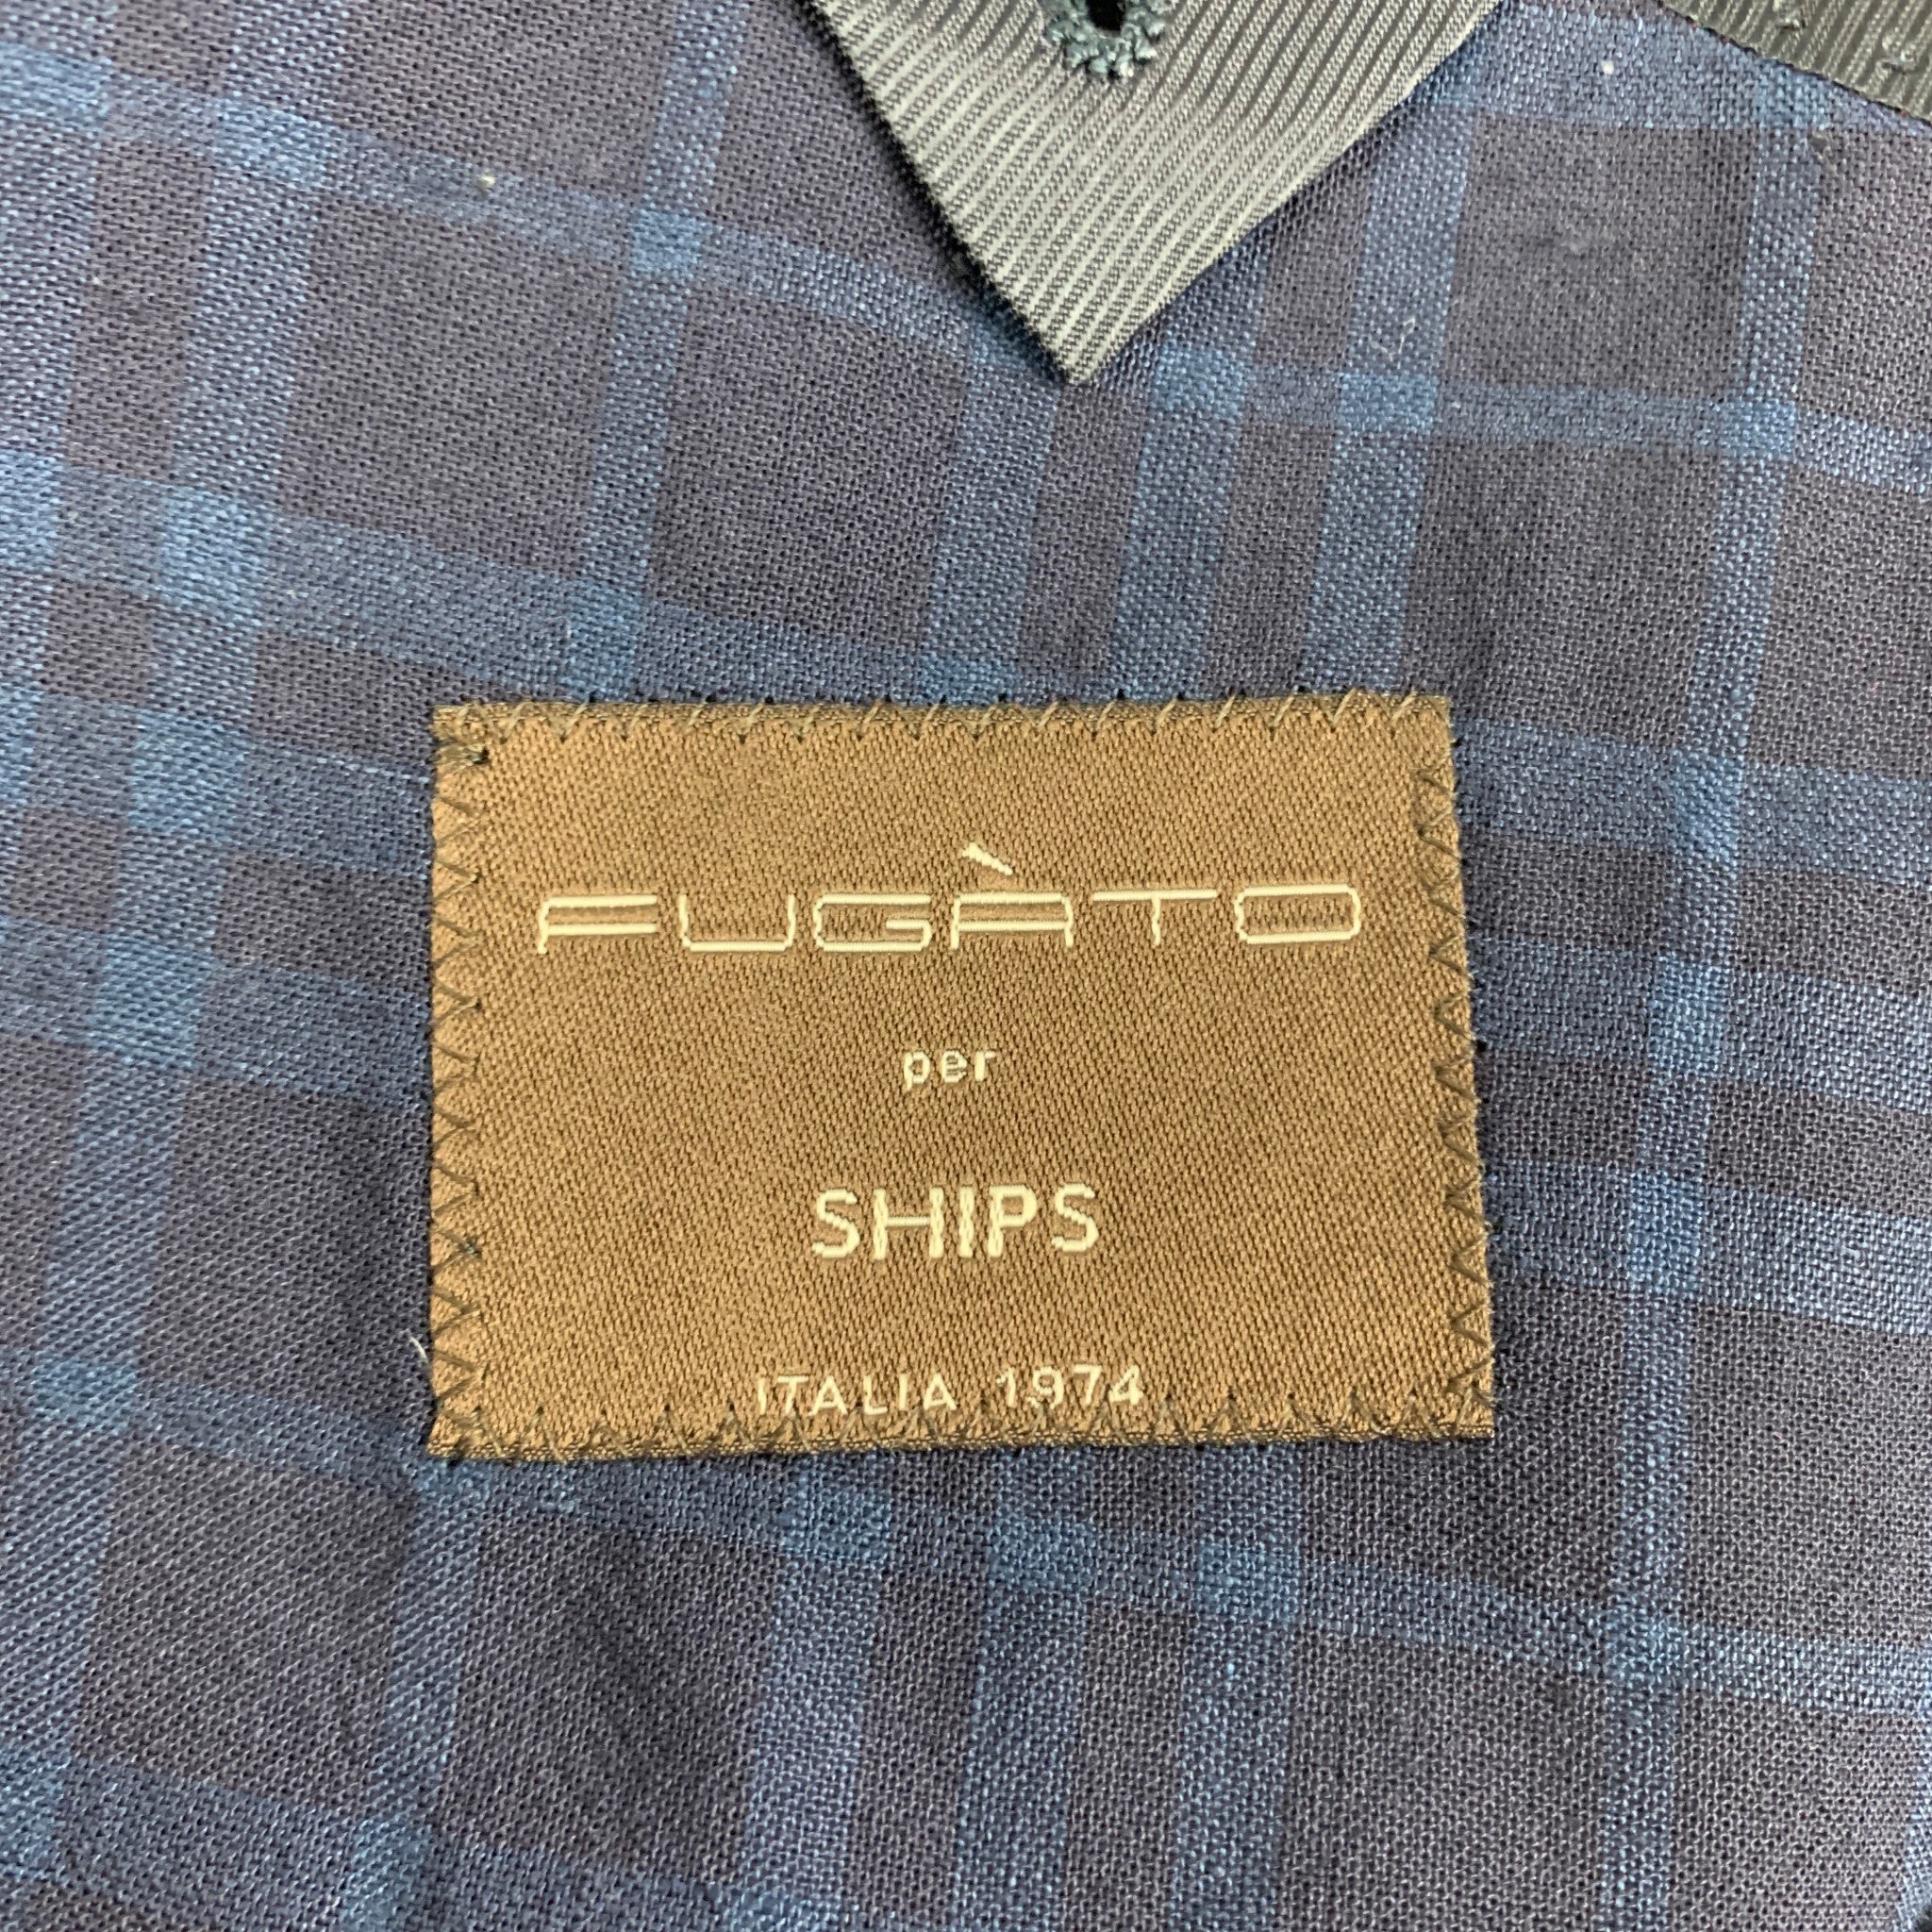 FUGATO for SHIPS Size 36 Navy Blue Plaid Flax Wool Sport Coat